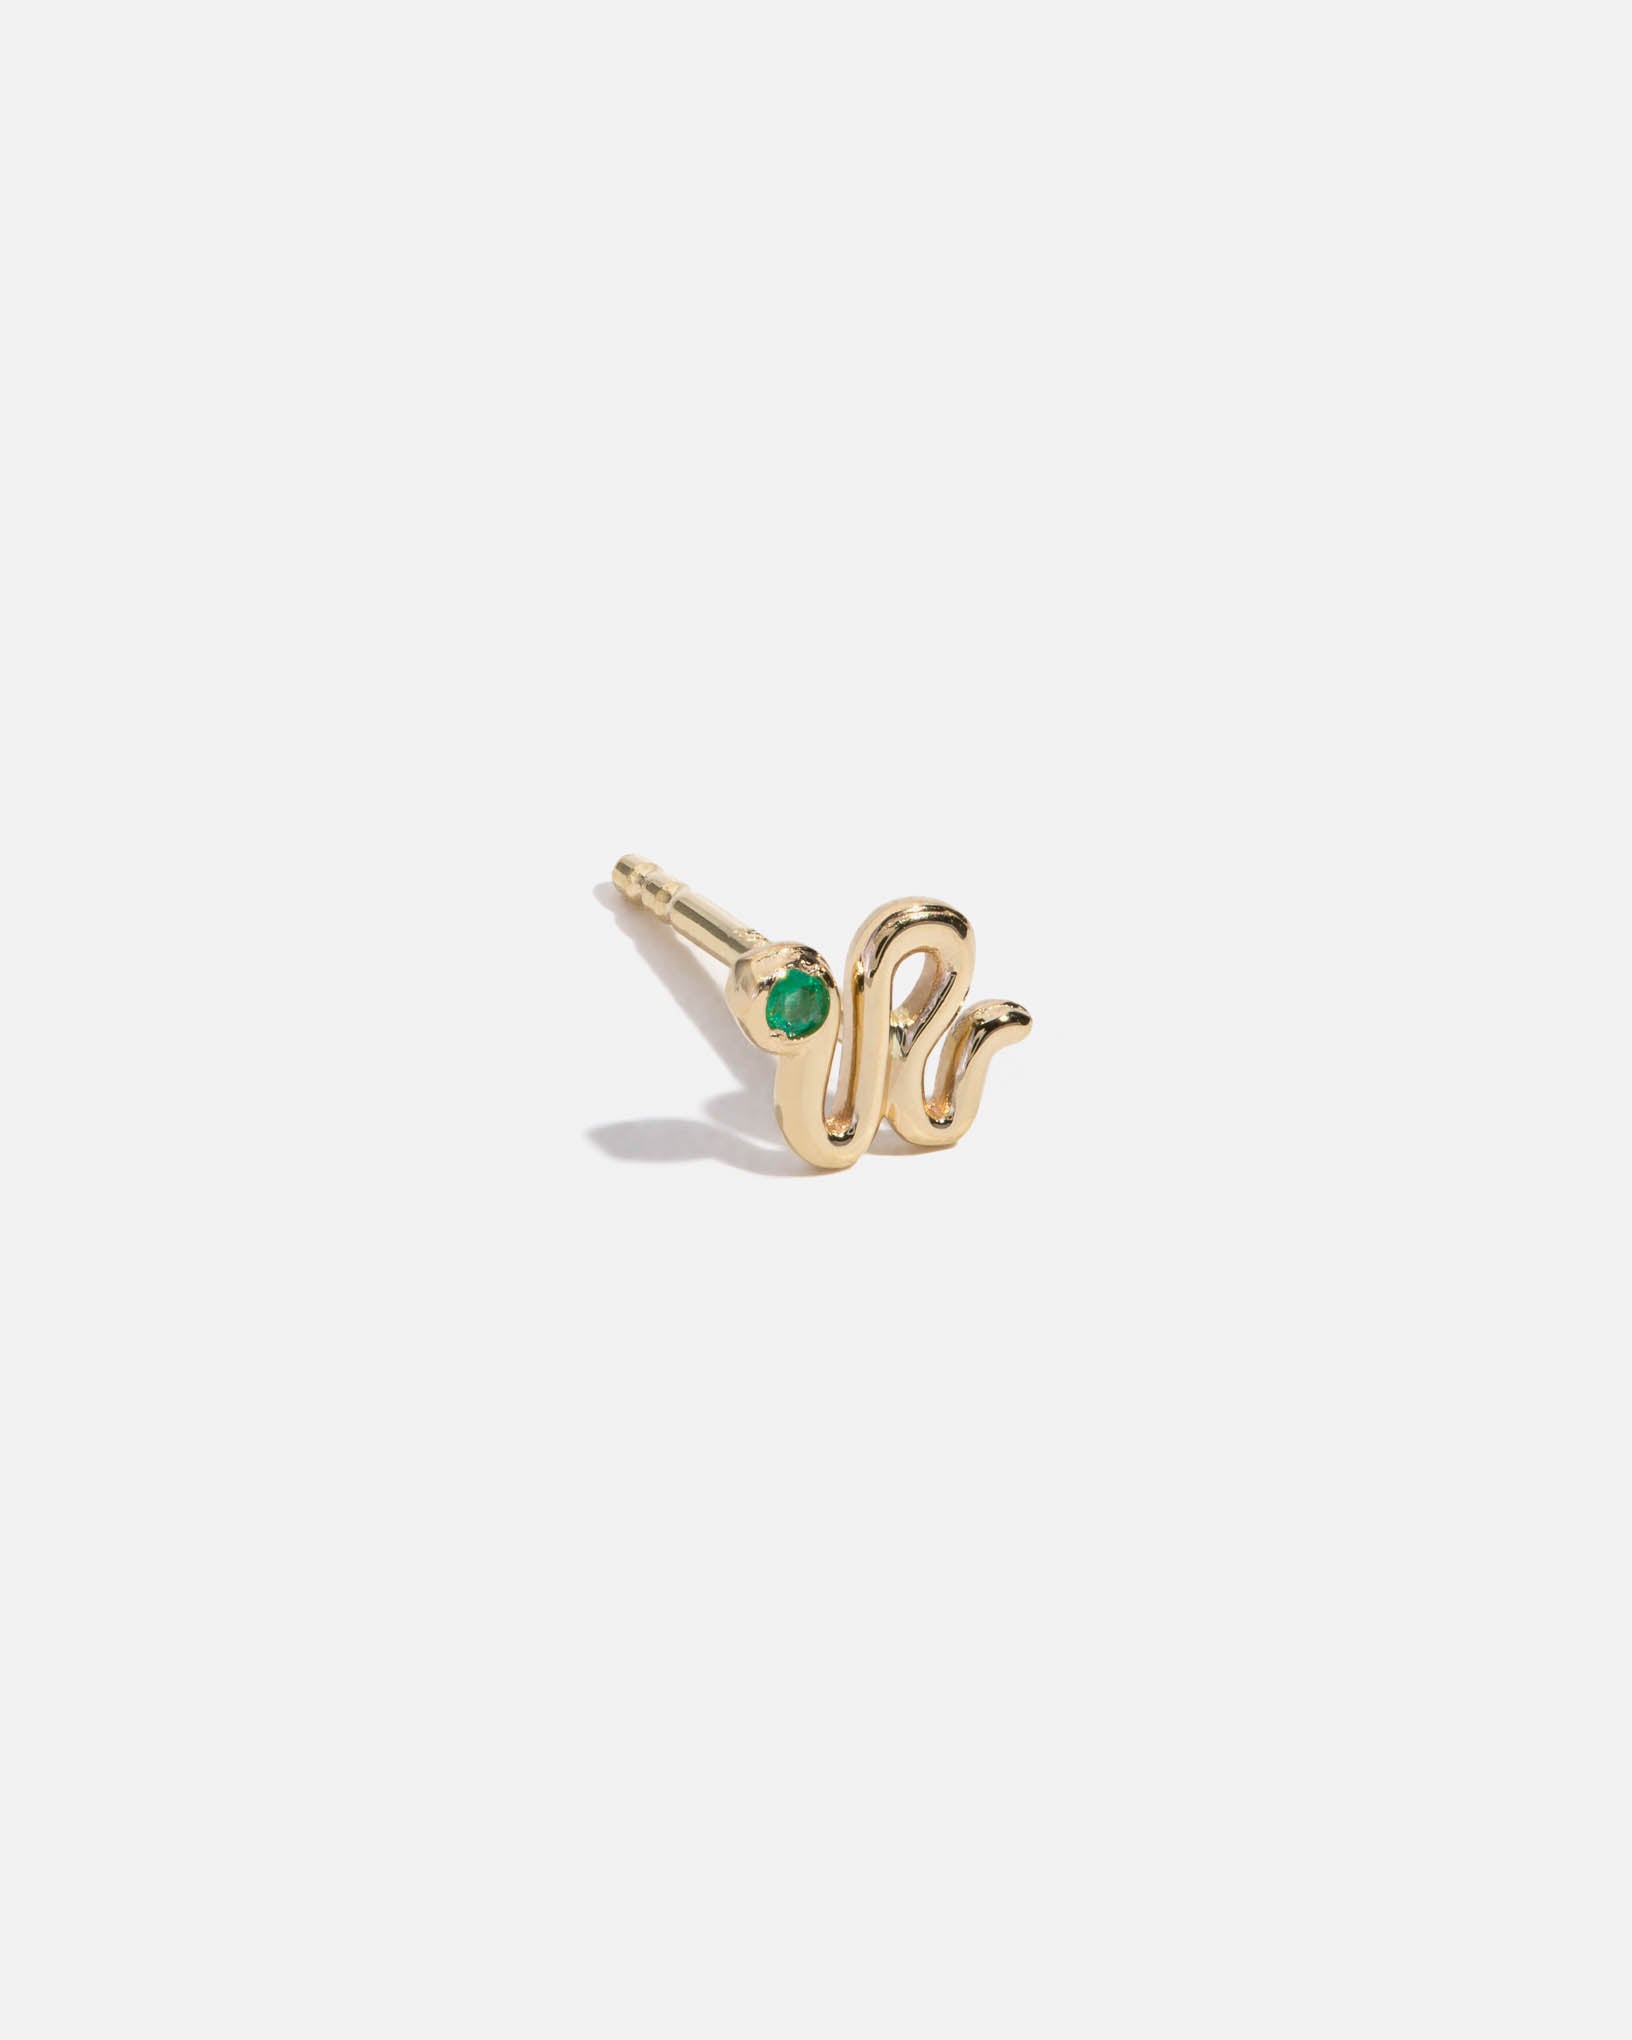 Snake Earring in 14k Yellow Gold with a Brazilian Emerald